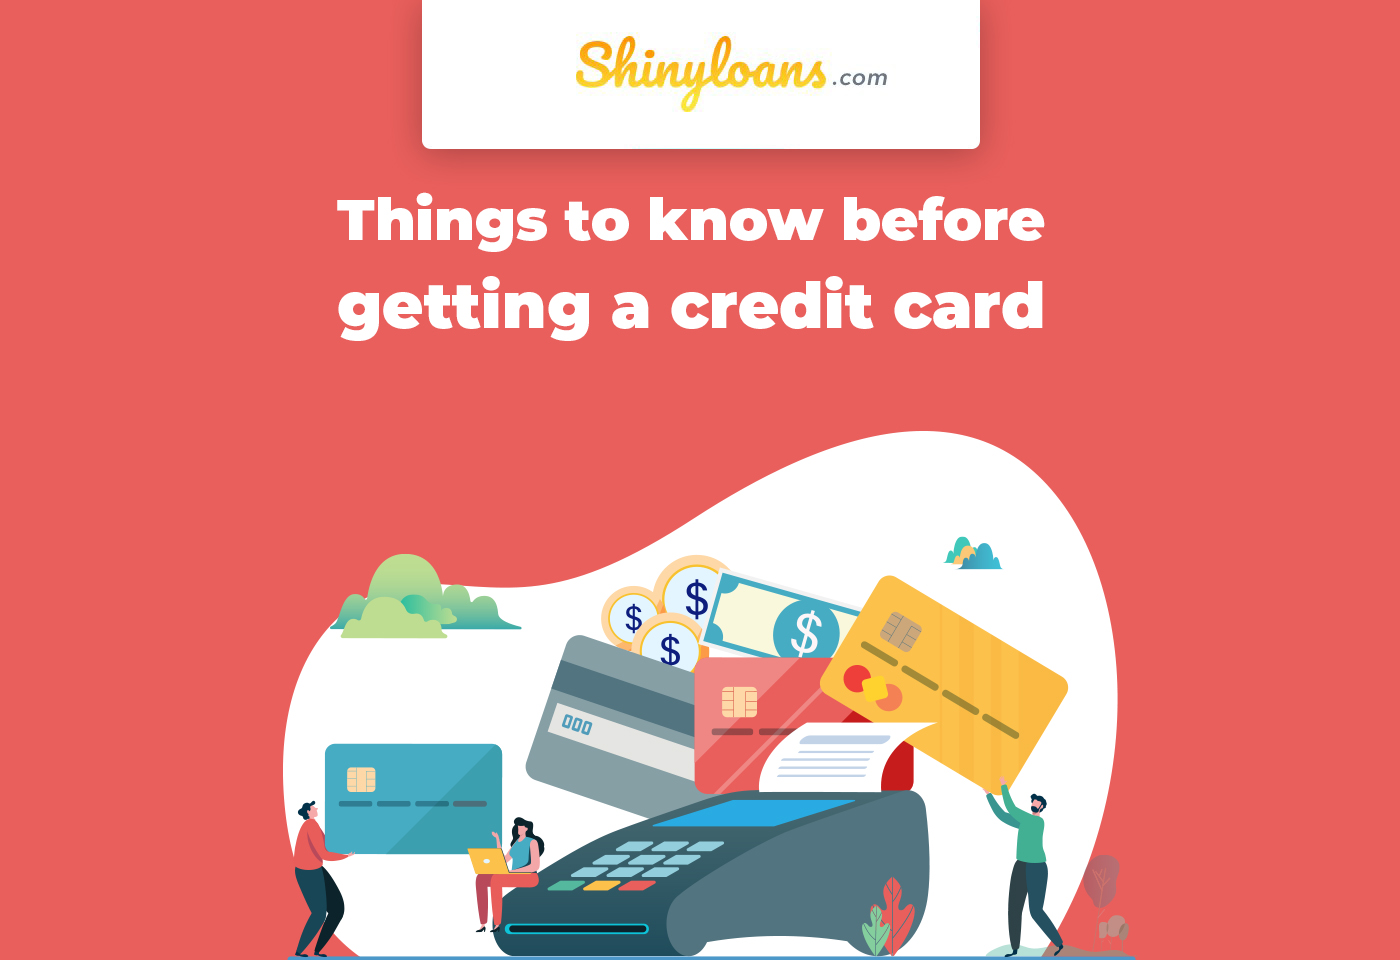 Things to know before getting a credit card